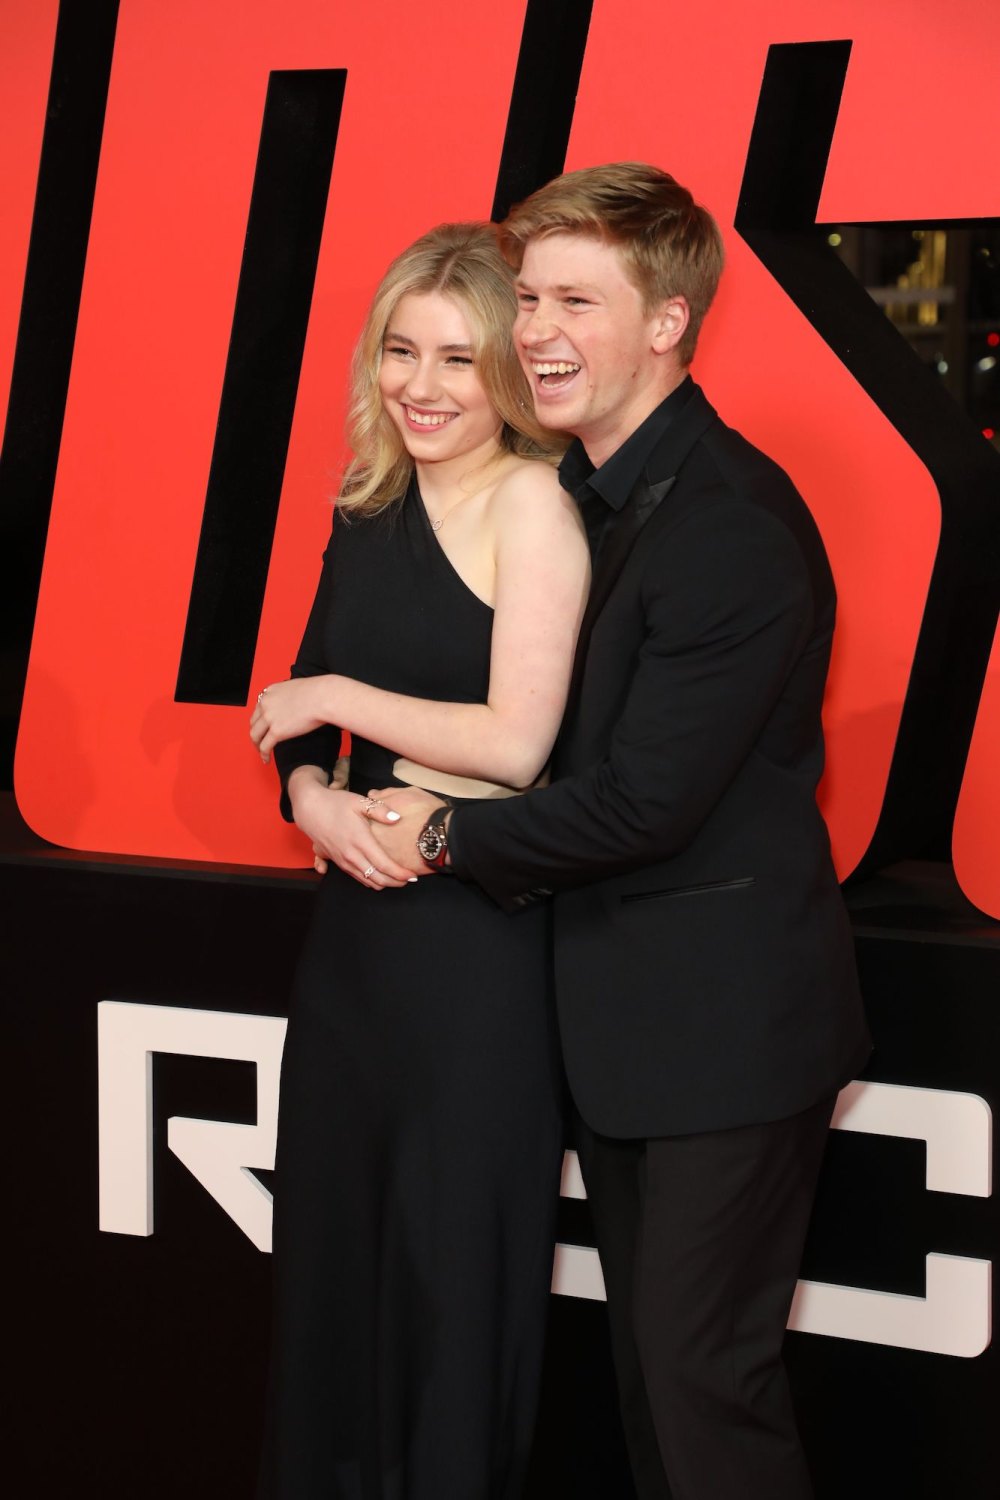 Robert Irwin and Girlfriend Rorie Buckey Cuddle Up During Red Carpet Debut at Mission Impossible Premiere